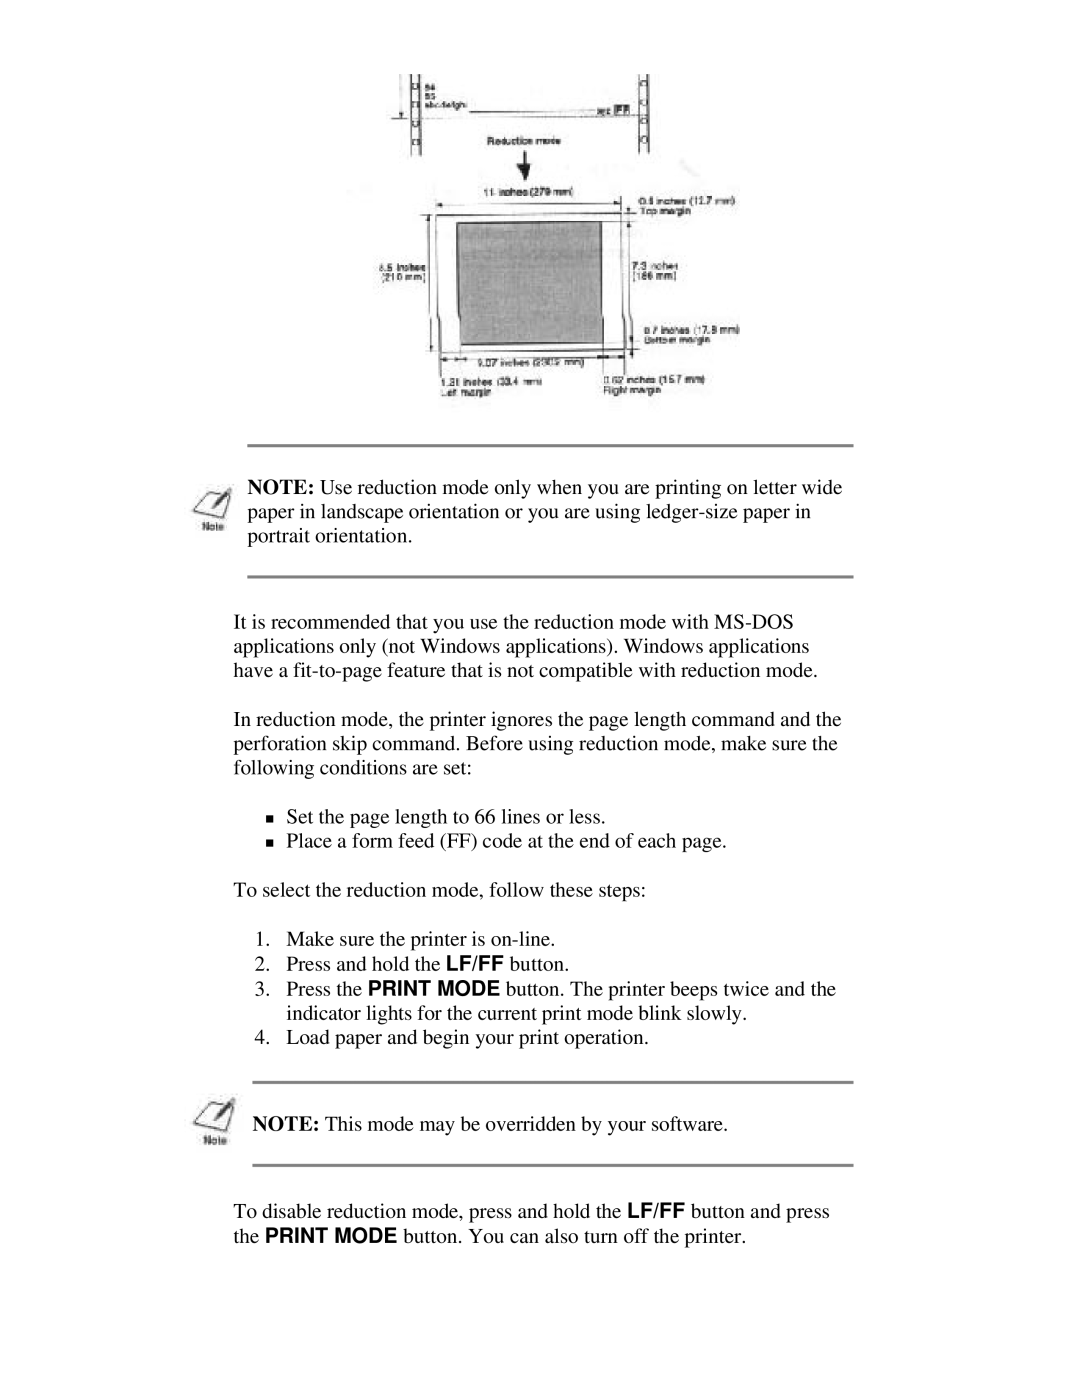 Canon BJ-230 user manual T Set the page length to 66 lines or less, Place a form feed FF code at the end of each page 